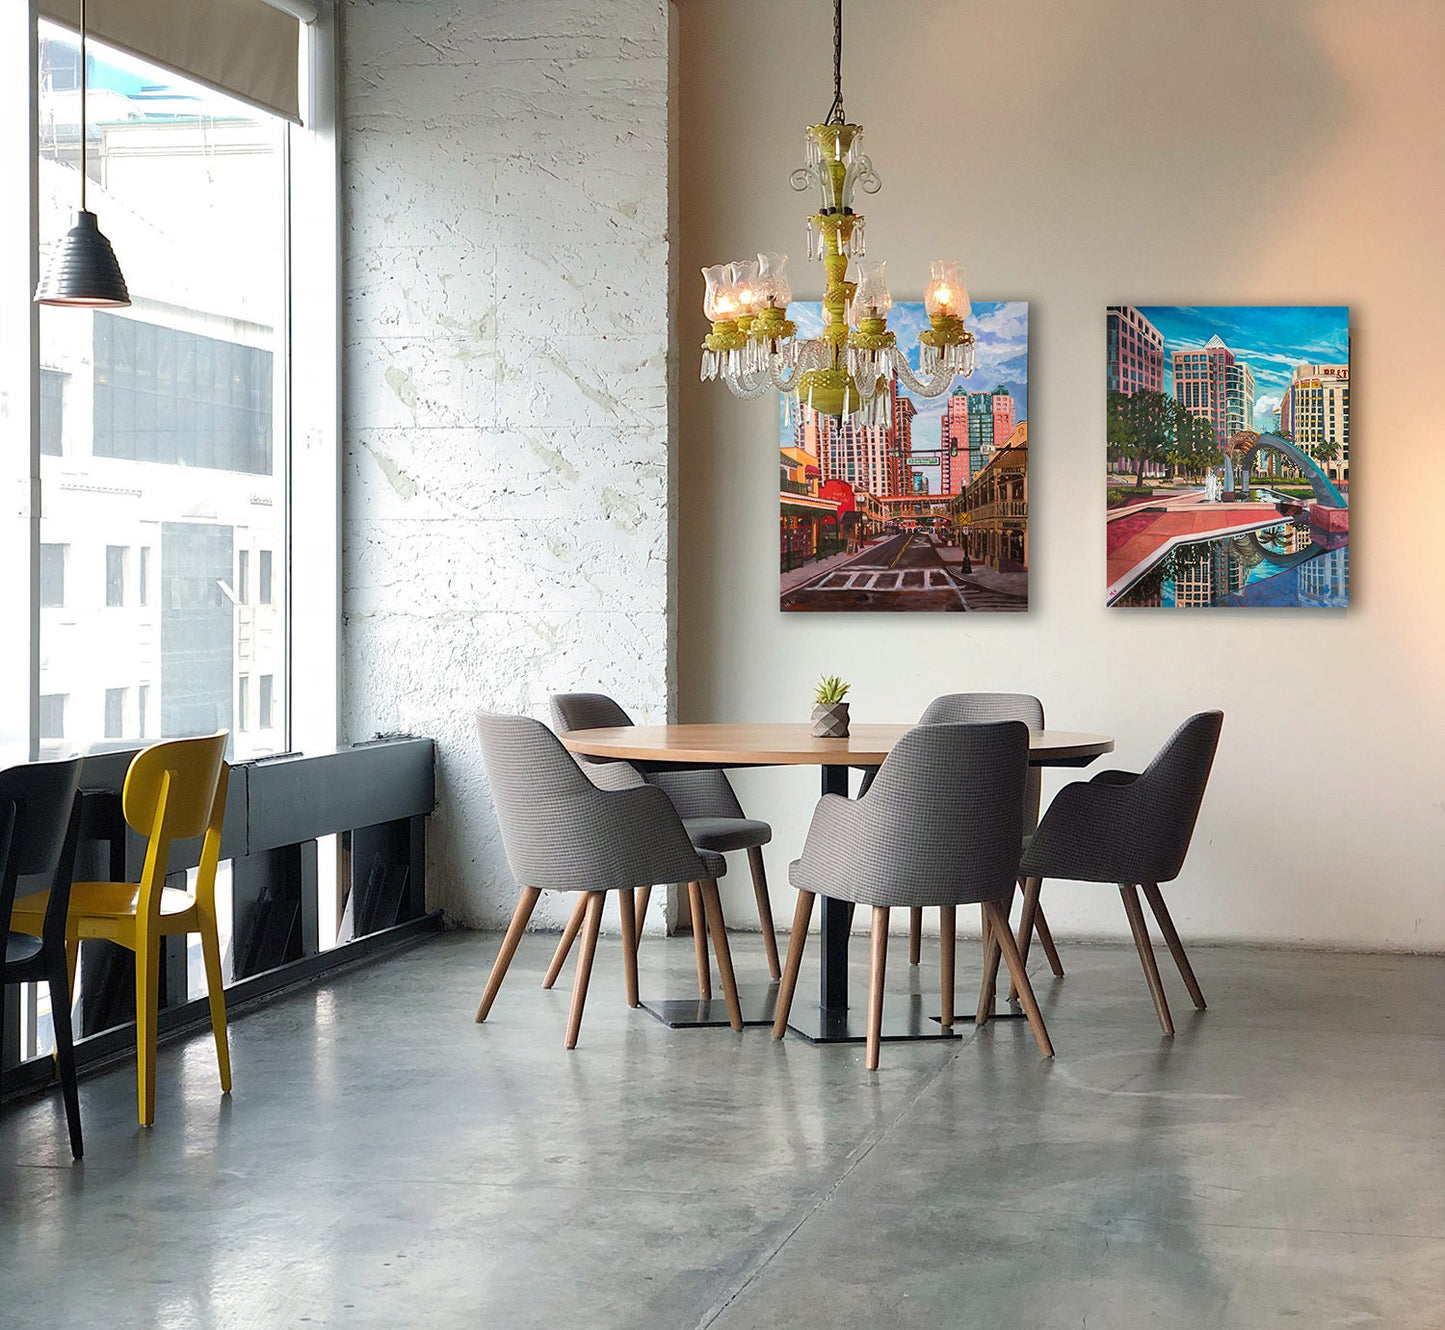 two paintings of downtown orlando in office building space